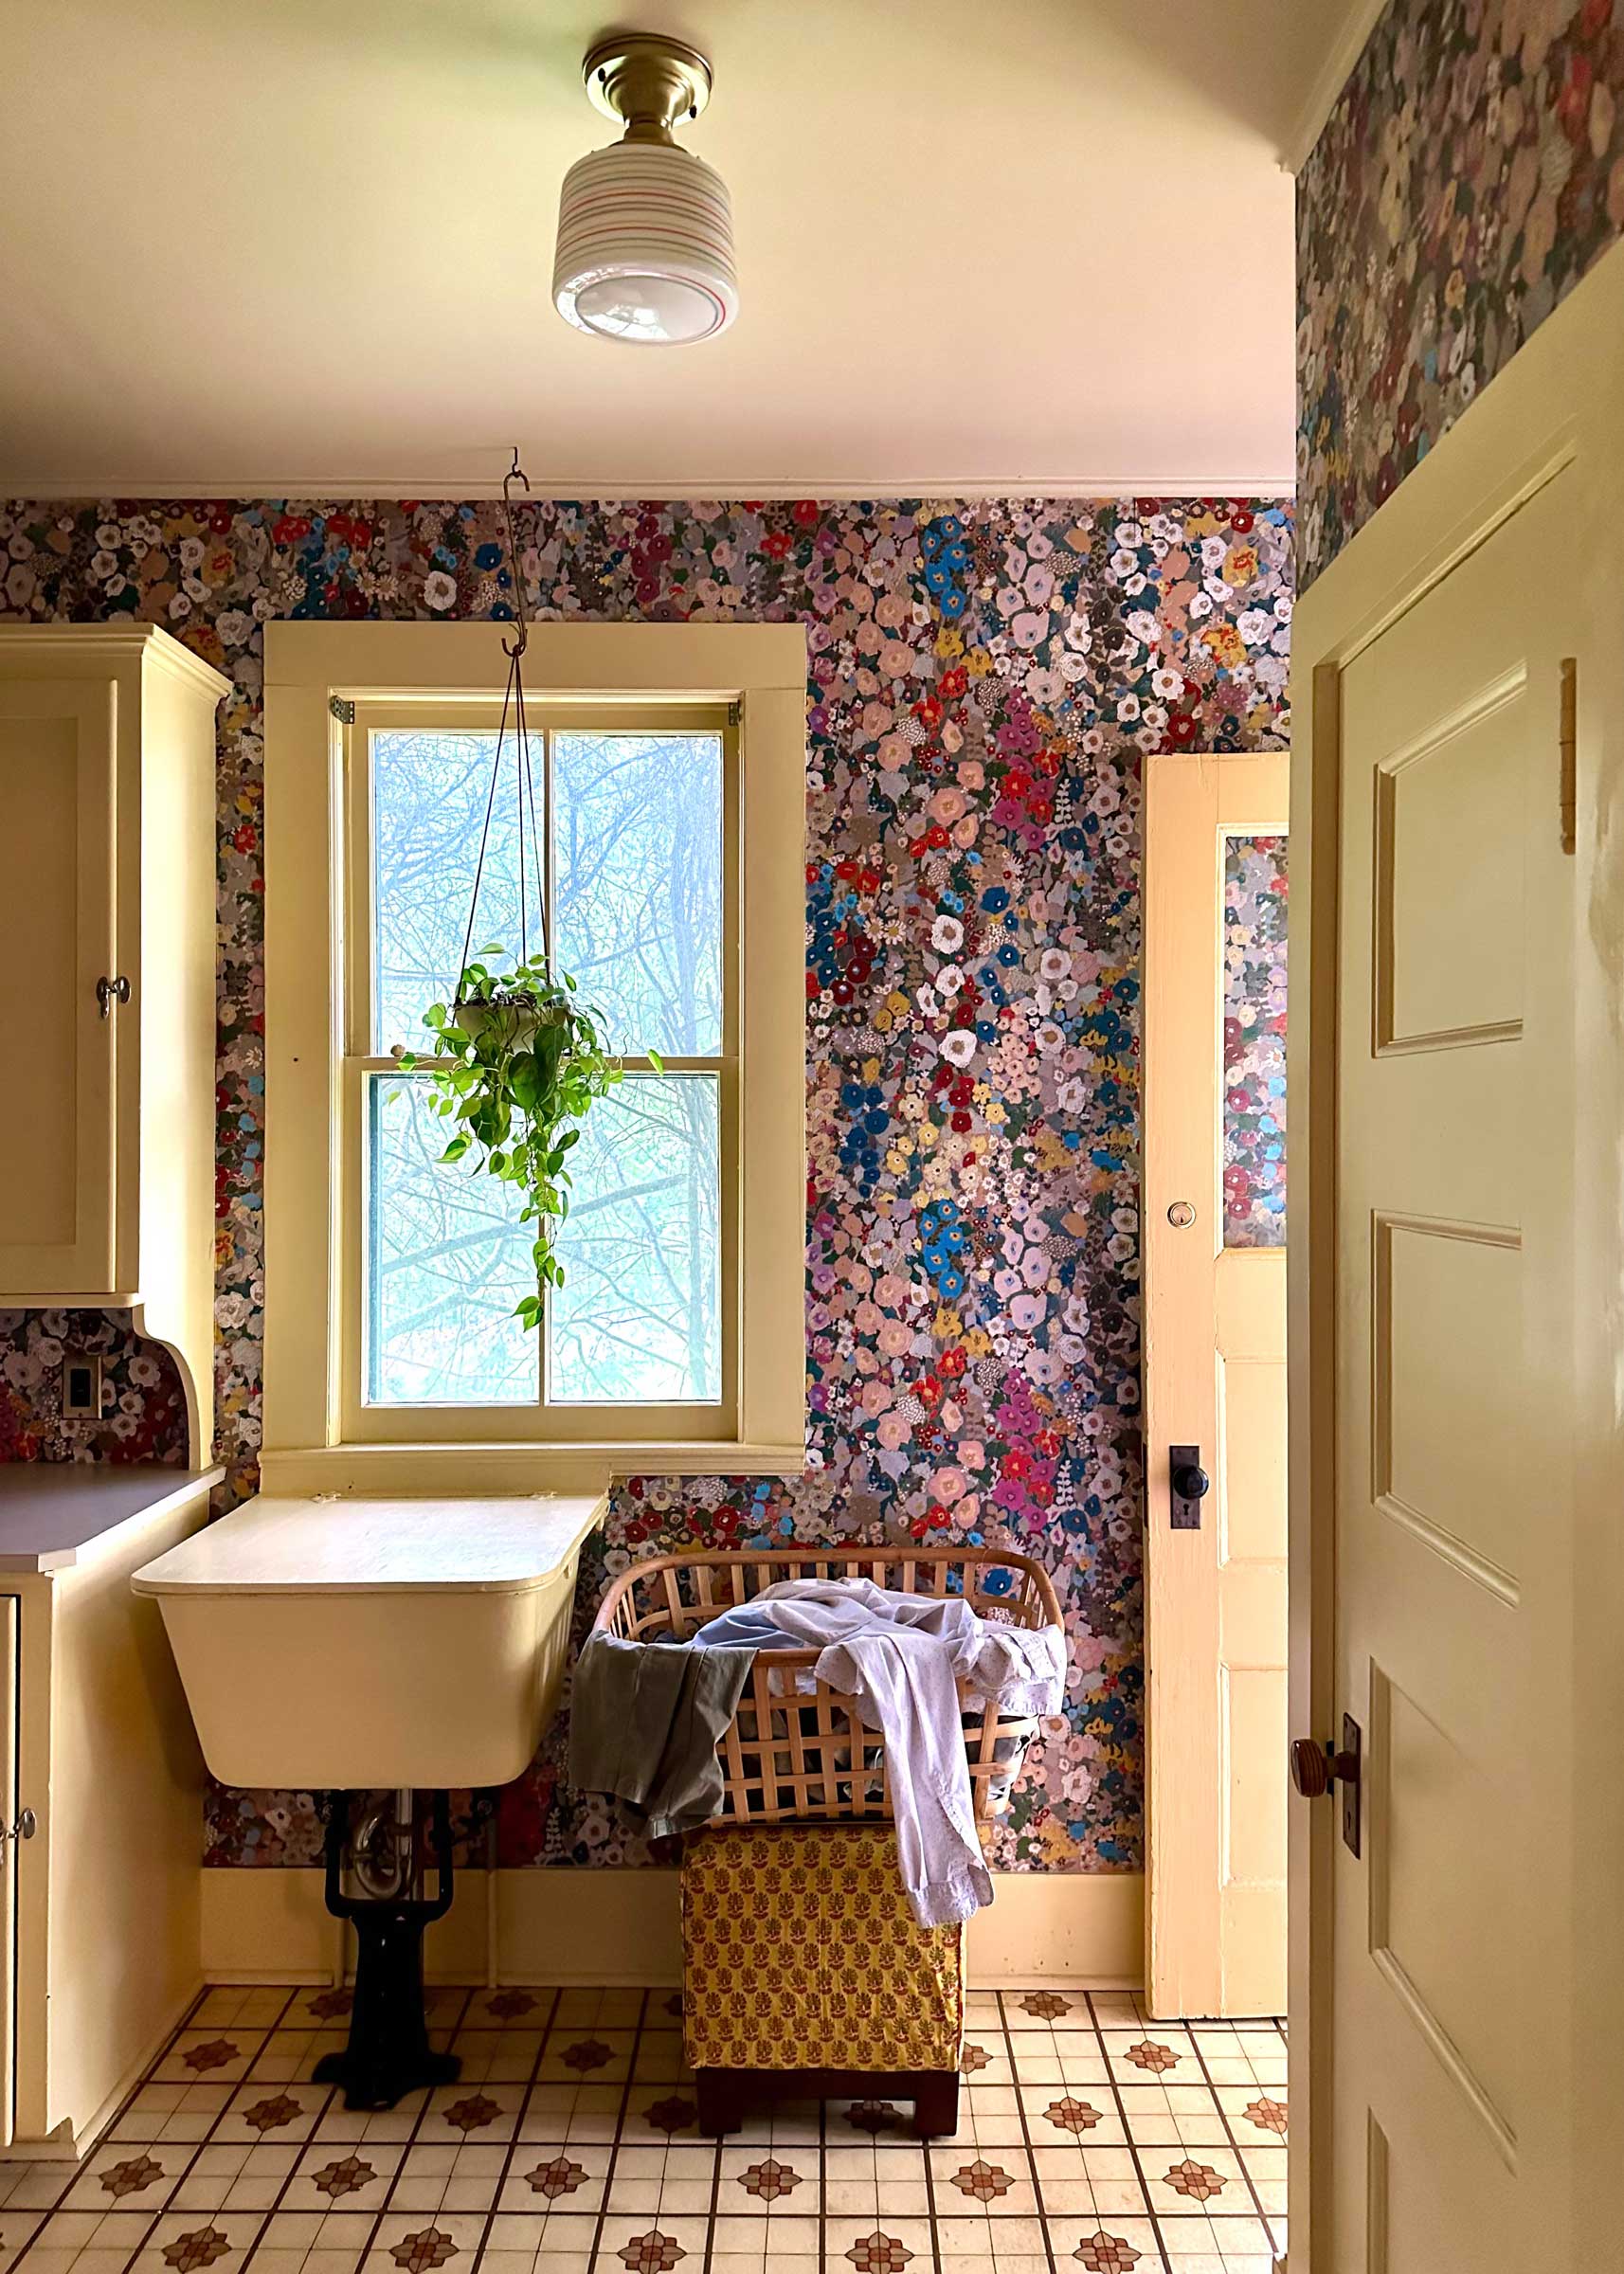 A laundry room with floral wallpaper.